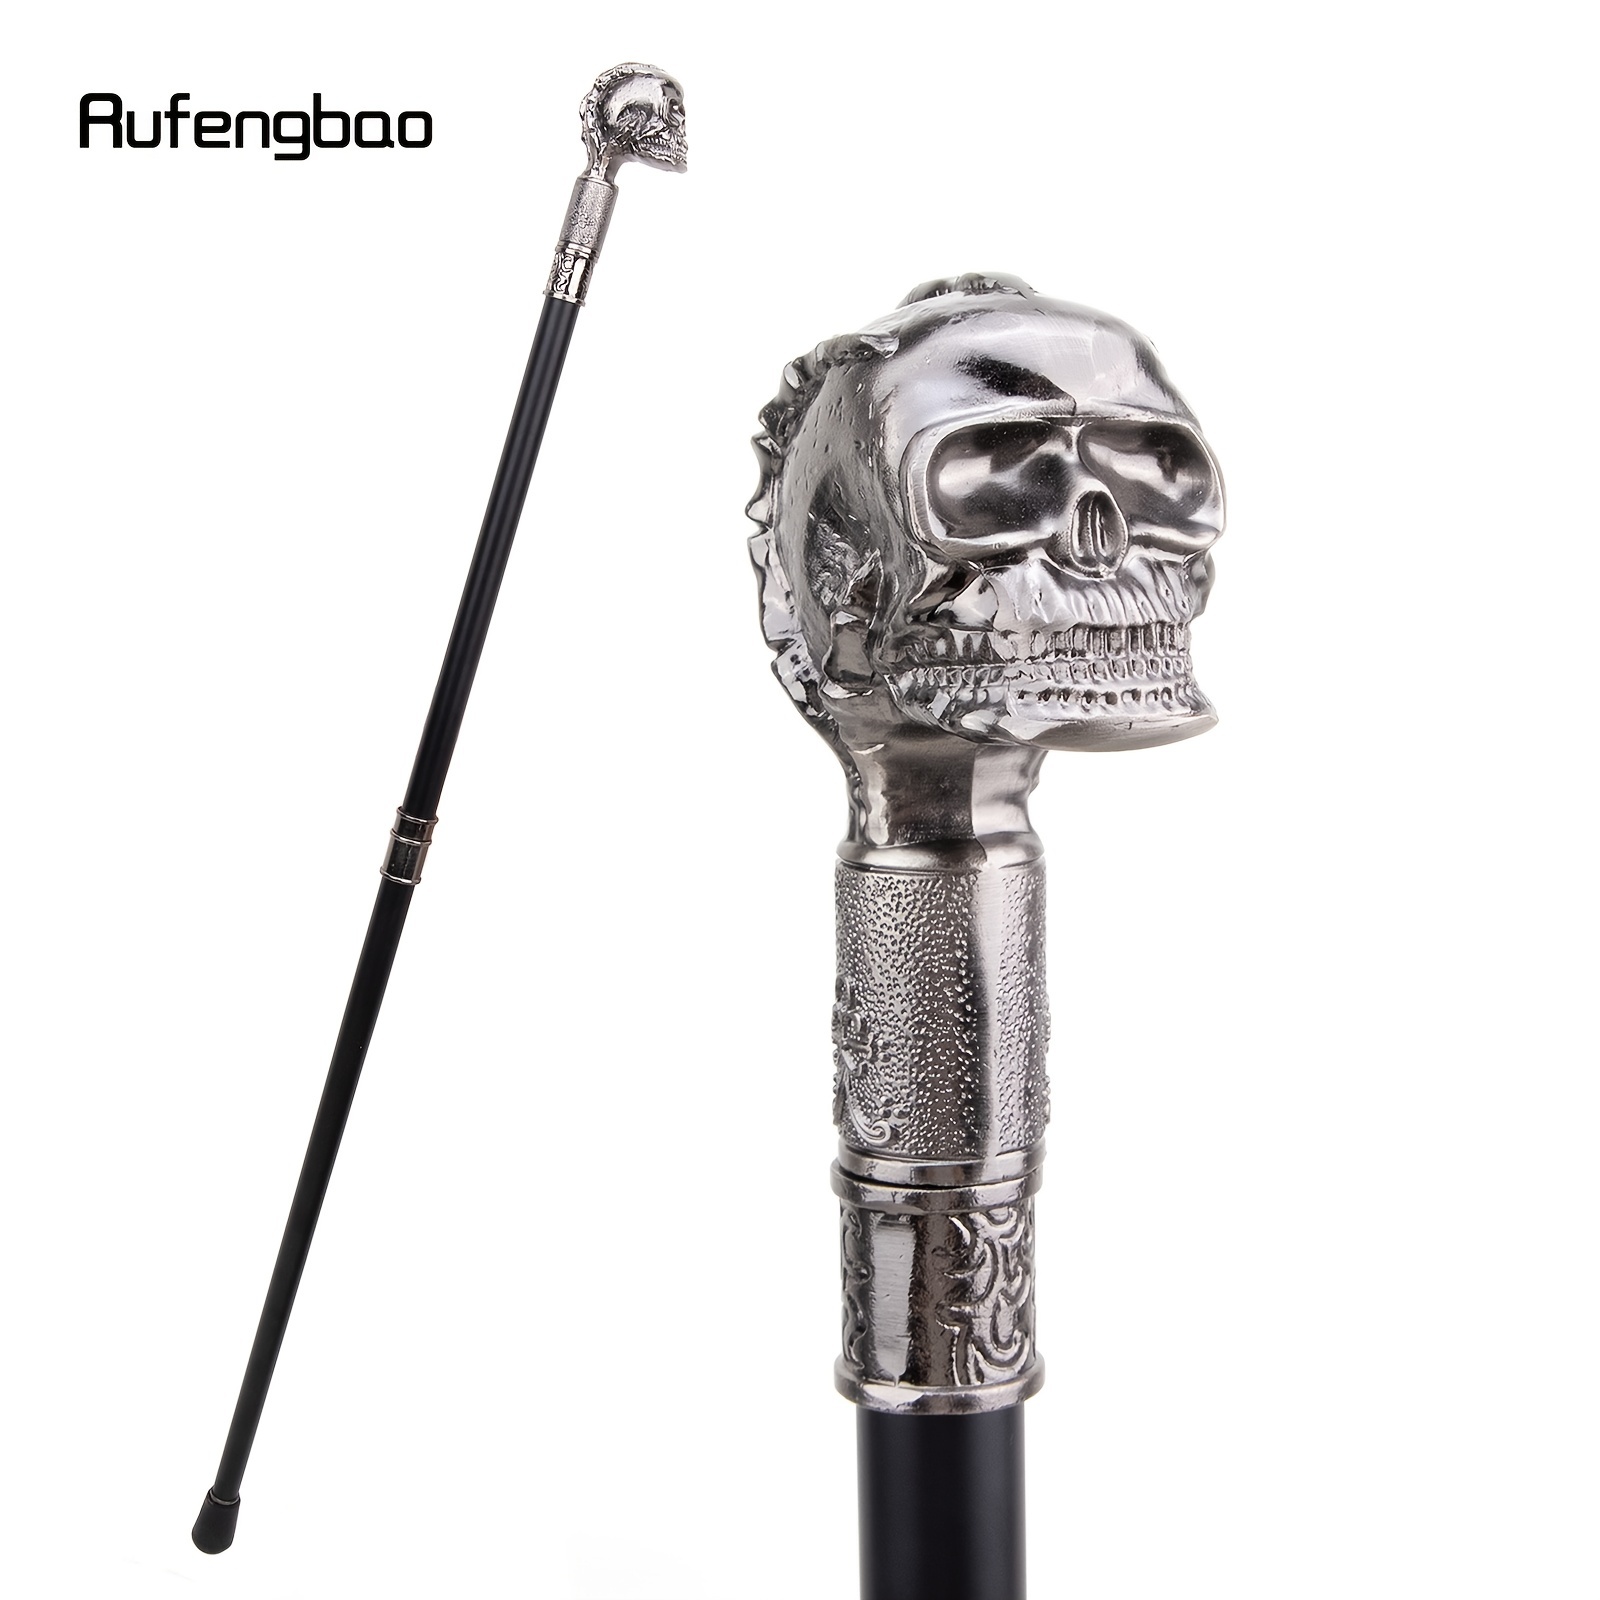 Leopard Brown Wooden Walking Cane: Fashionable, Vampire Themed Halloween  Party Accessory From Rufengbao, $17